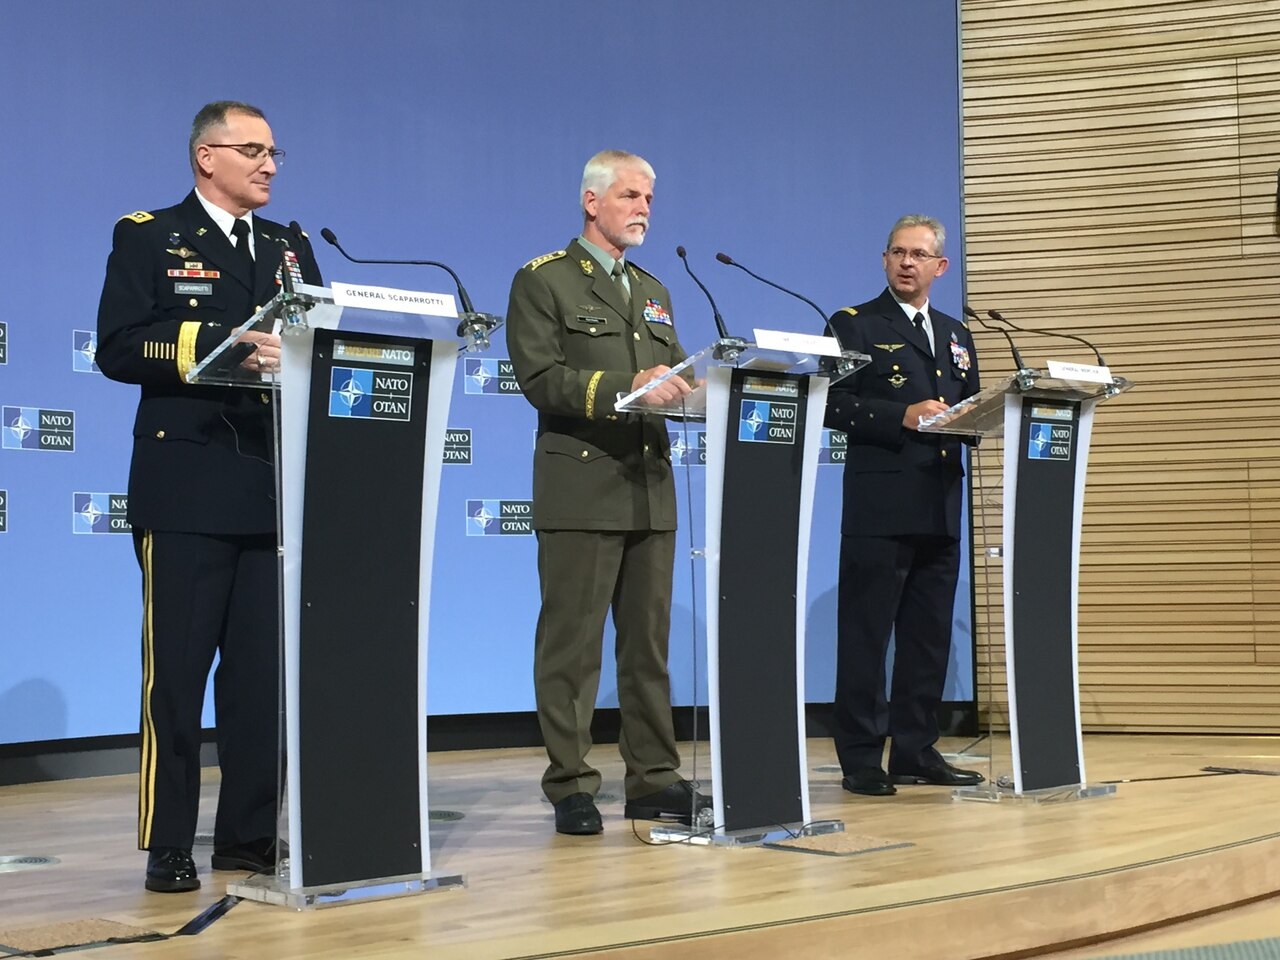 Left to right, U.S. Army Gen. Curtis M. Scaparrotti, NATO’s supreme allied commander for Europe; Gen. Petr Pavel of the Czech army, chairman of the NATO Military Committee; and Gen. Denis Mercier of the French air force, NATO’s supreme allied commander for transformation, brief reporters on the NATO Military Committee meeting in Brussels.